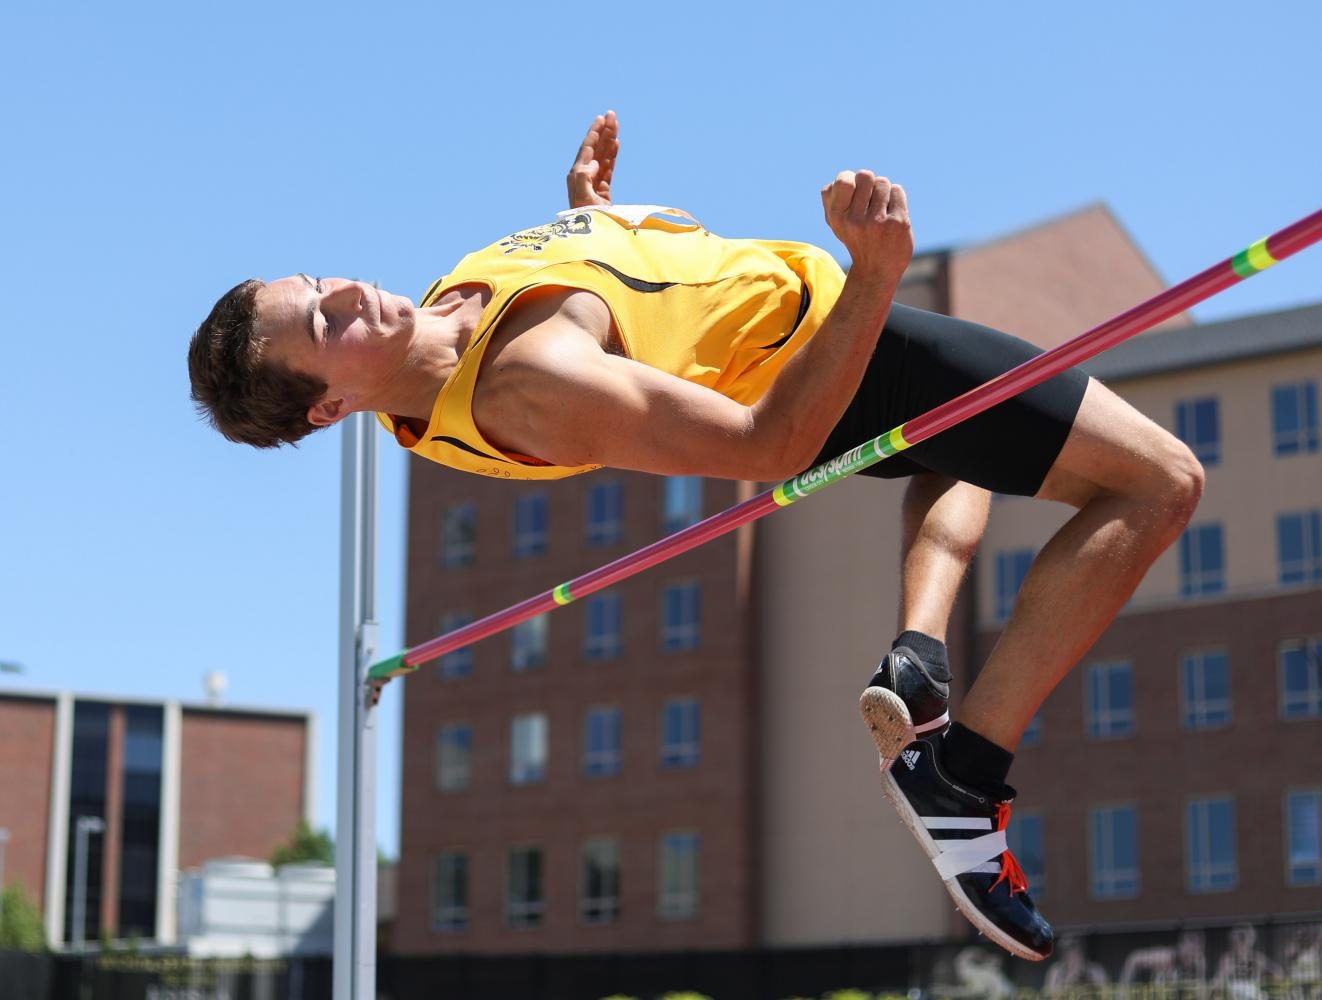 Ben+Johnson+high+jumps+during+the+decathlon+Friday+at+the+Missouri+Valley+Conference+Outdoor+Track+and+Field+Championship.+Johnson+won+the+decathlon+by+a+margin+of+over+400+points%2C+scoring+a+total+of+7053+points.+%28May+12%2C+2017%29